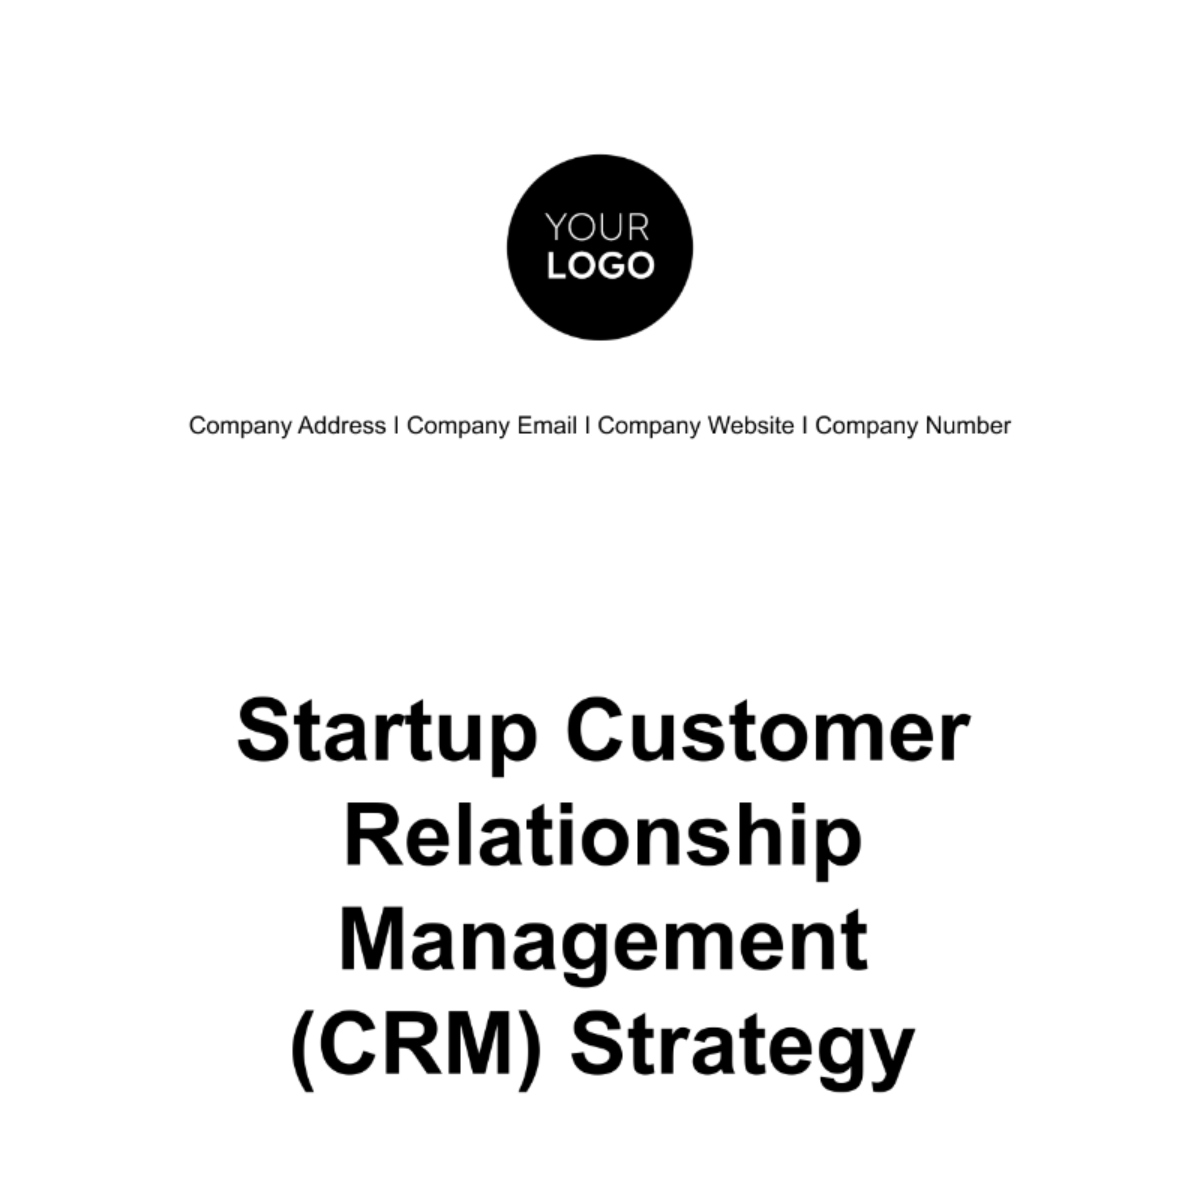 Startup Customer Relationship Management (CRM) Strategy Template